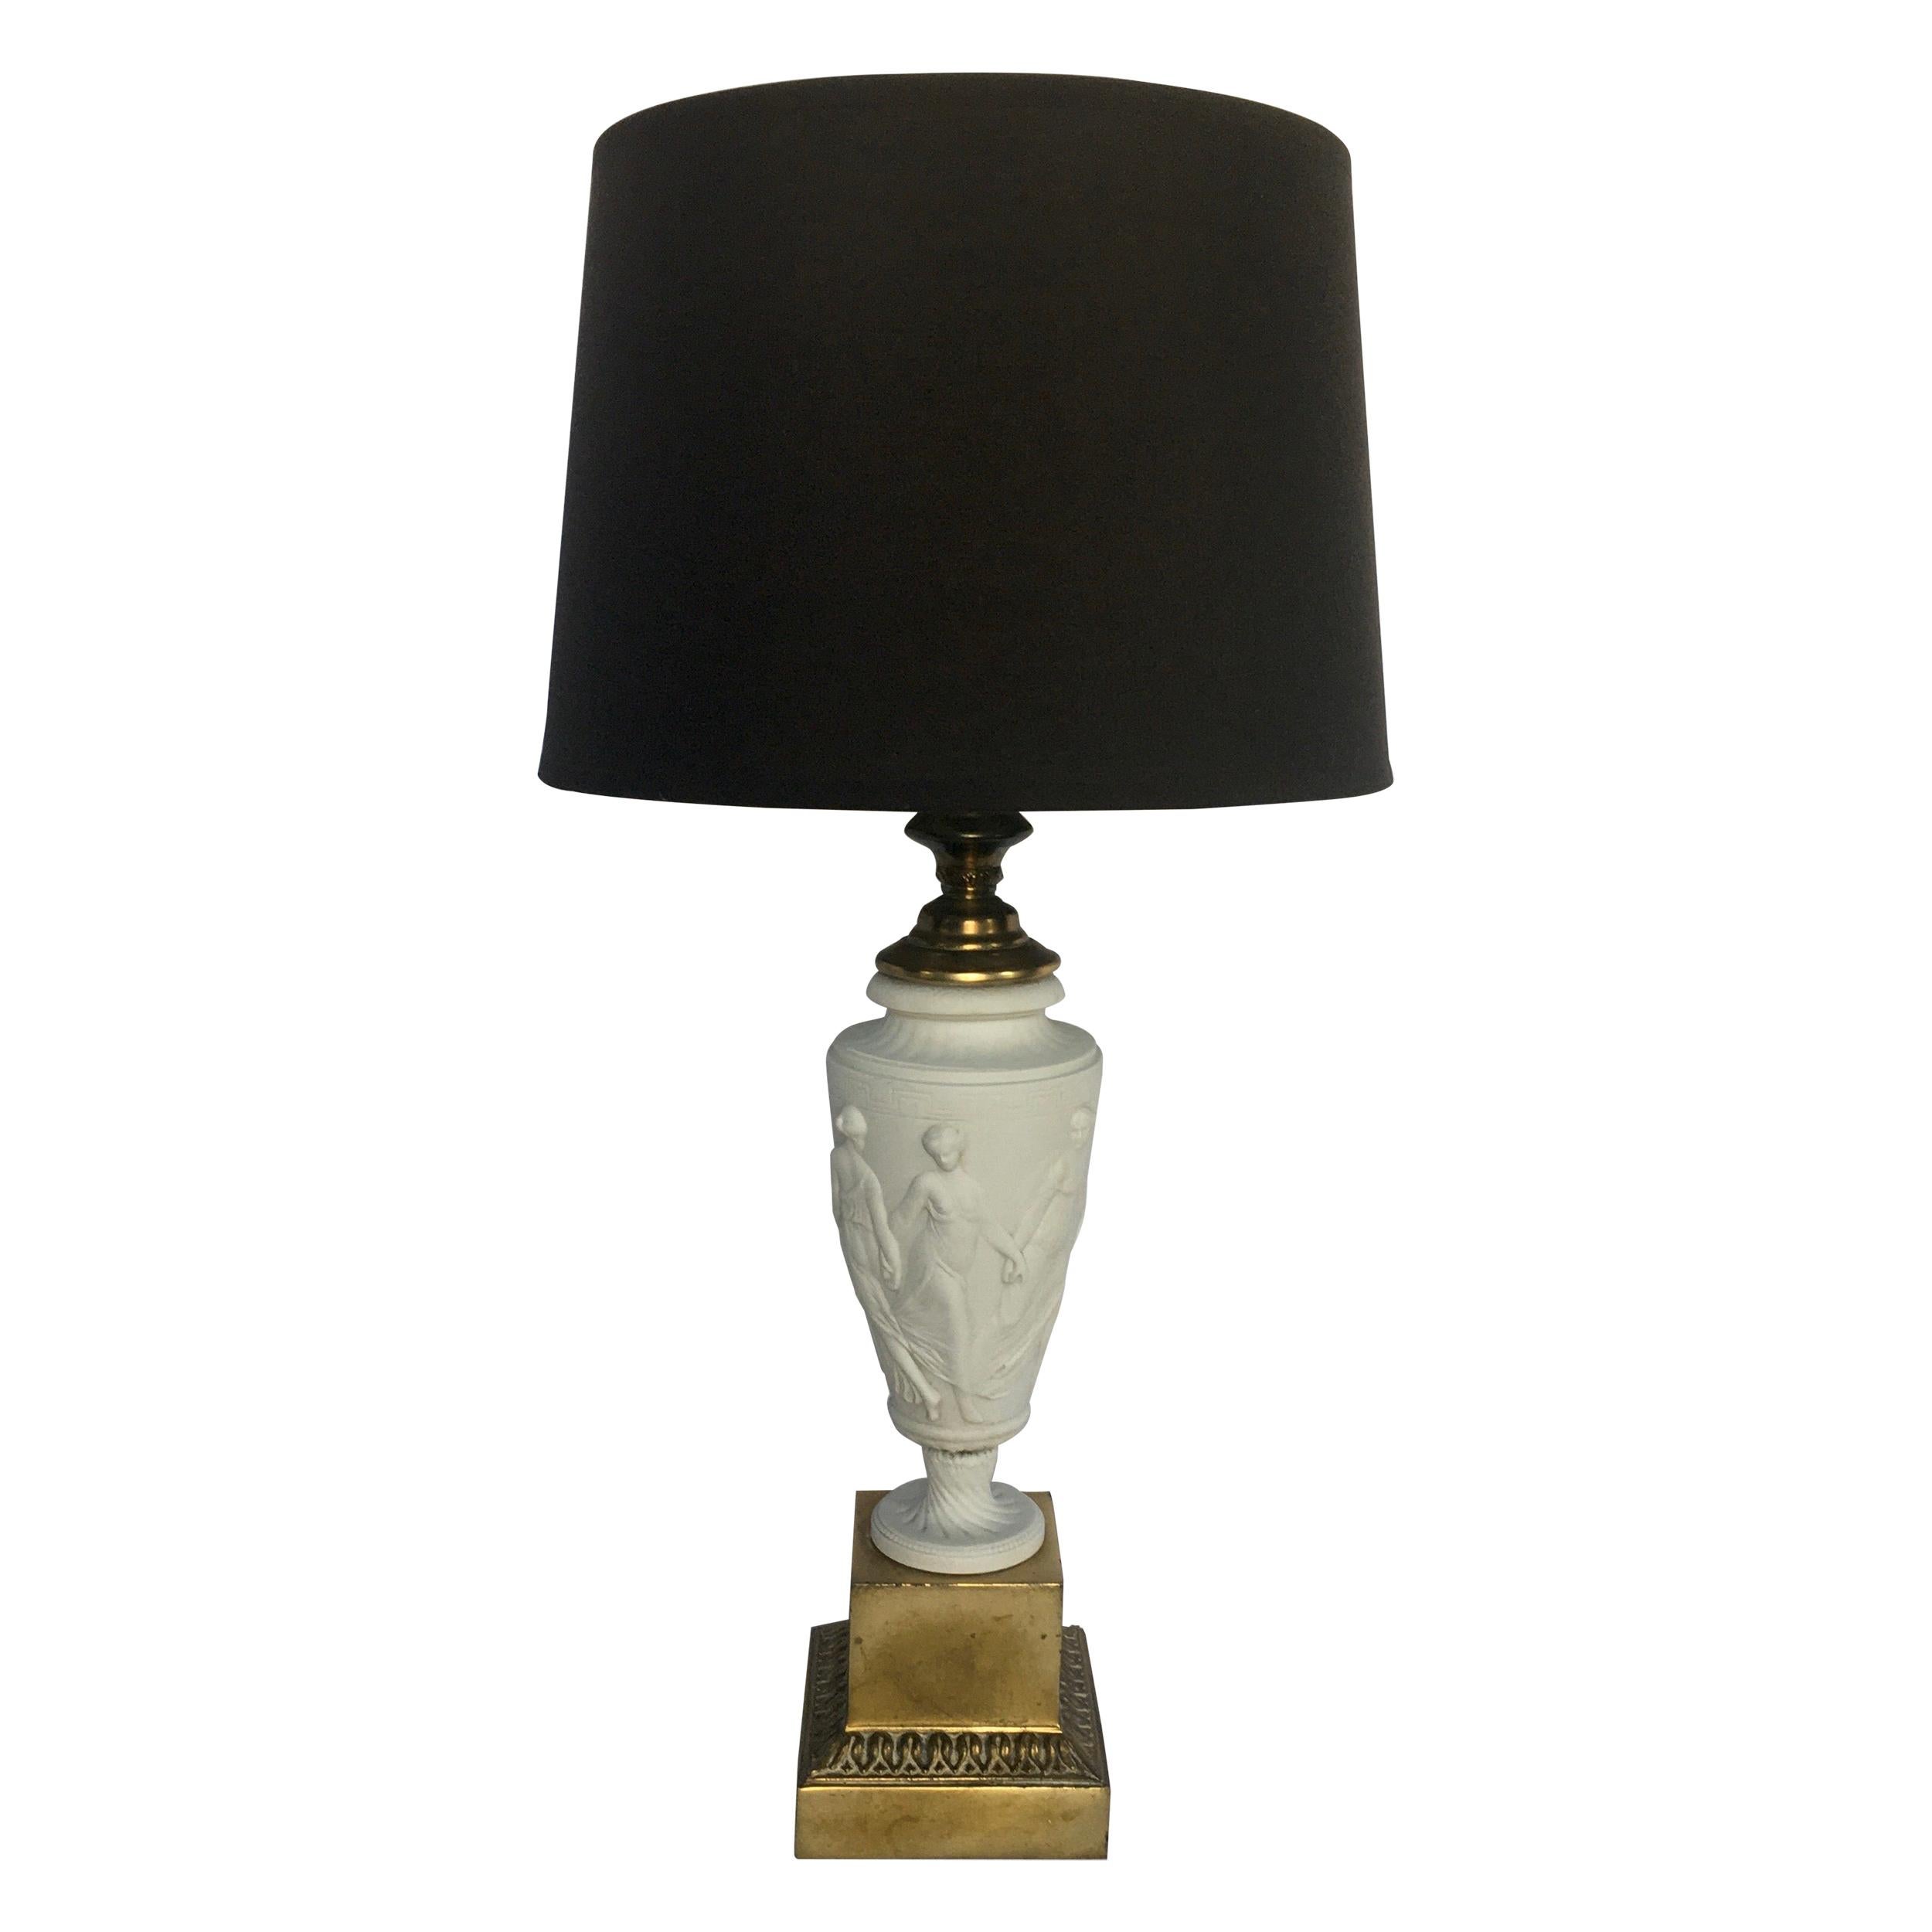 Neoclassical Bisque Porcelain, Silver Greek Key Table Lamp